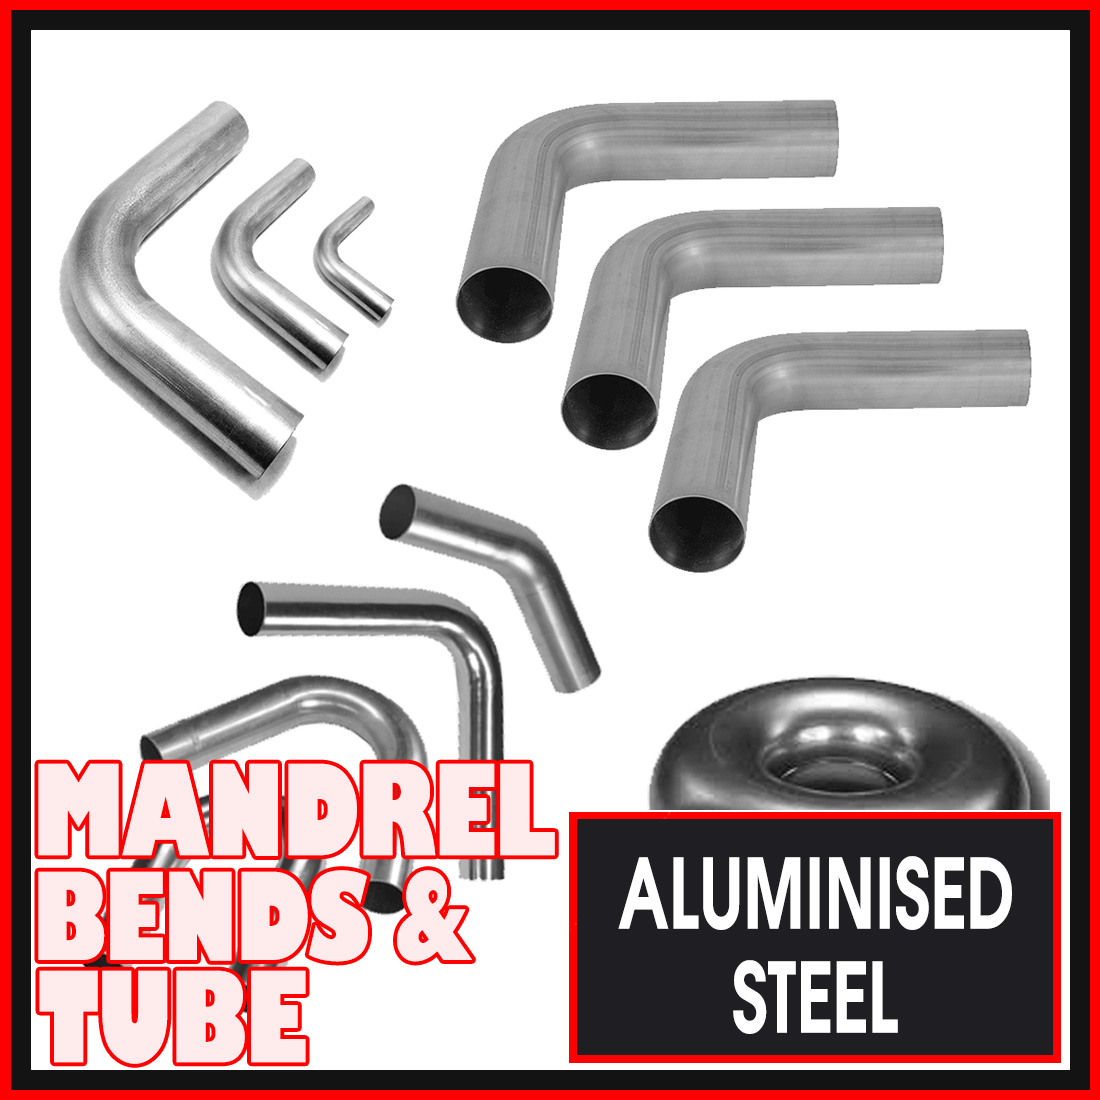 3" Aluminised Mild Steel Mandrel Bends and Exhaust Pipe image